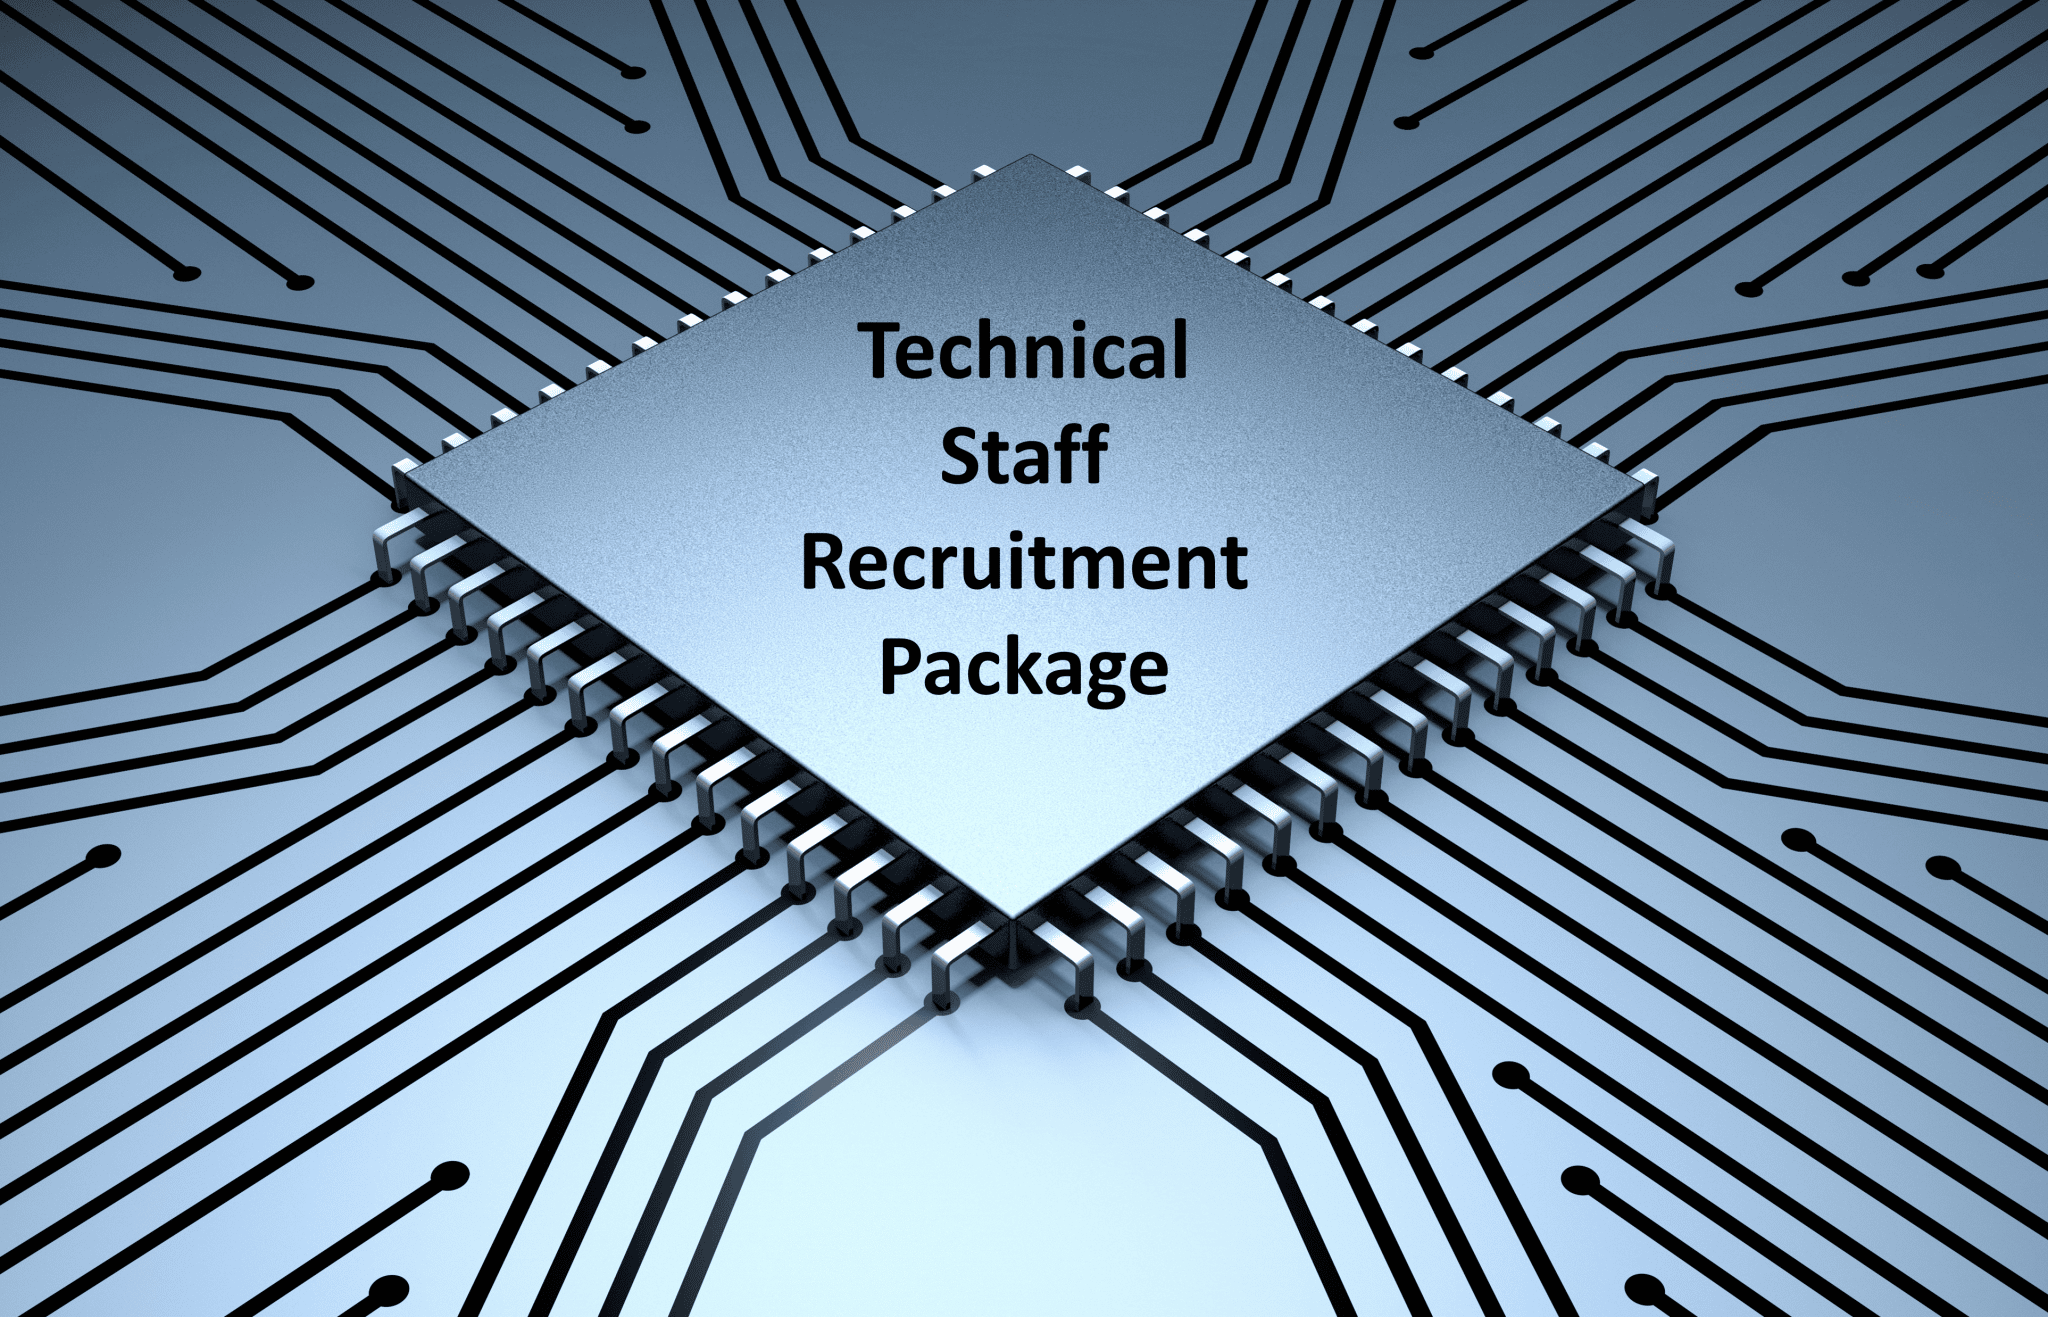 Recommended Recruitment Package Technical Staff ability tests